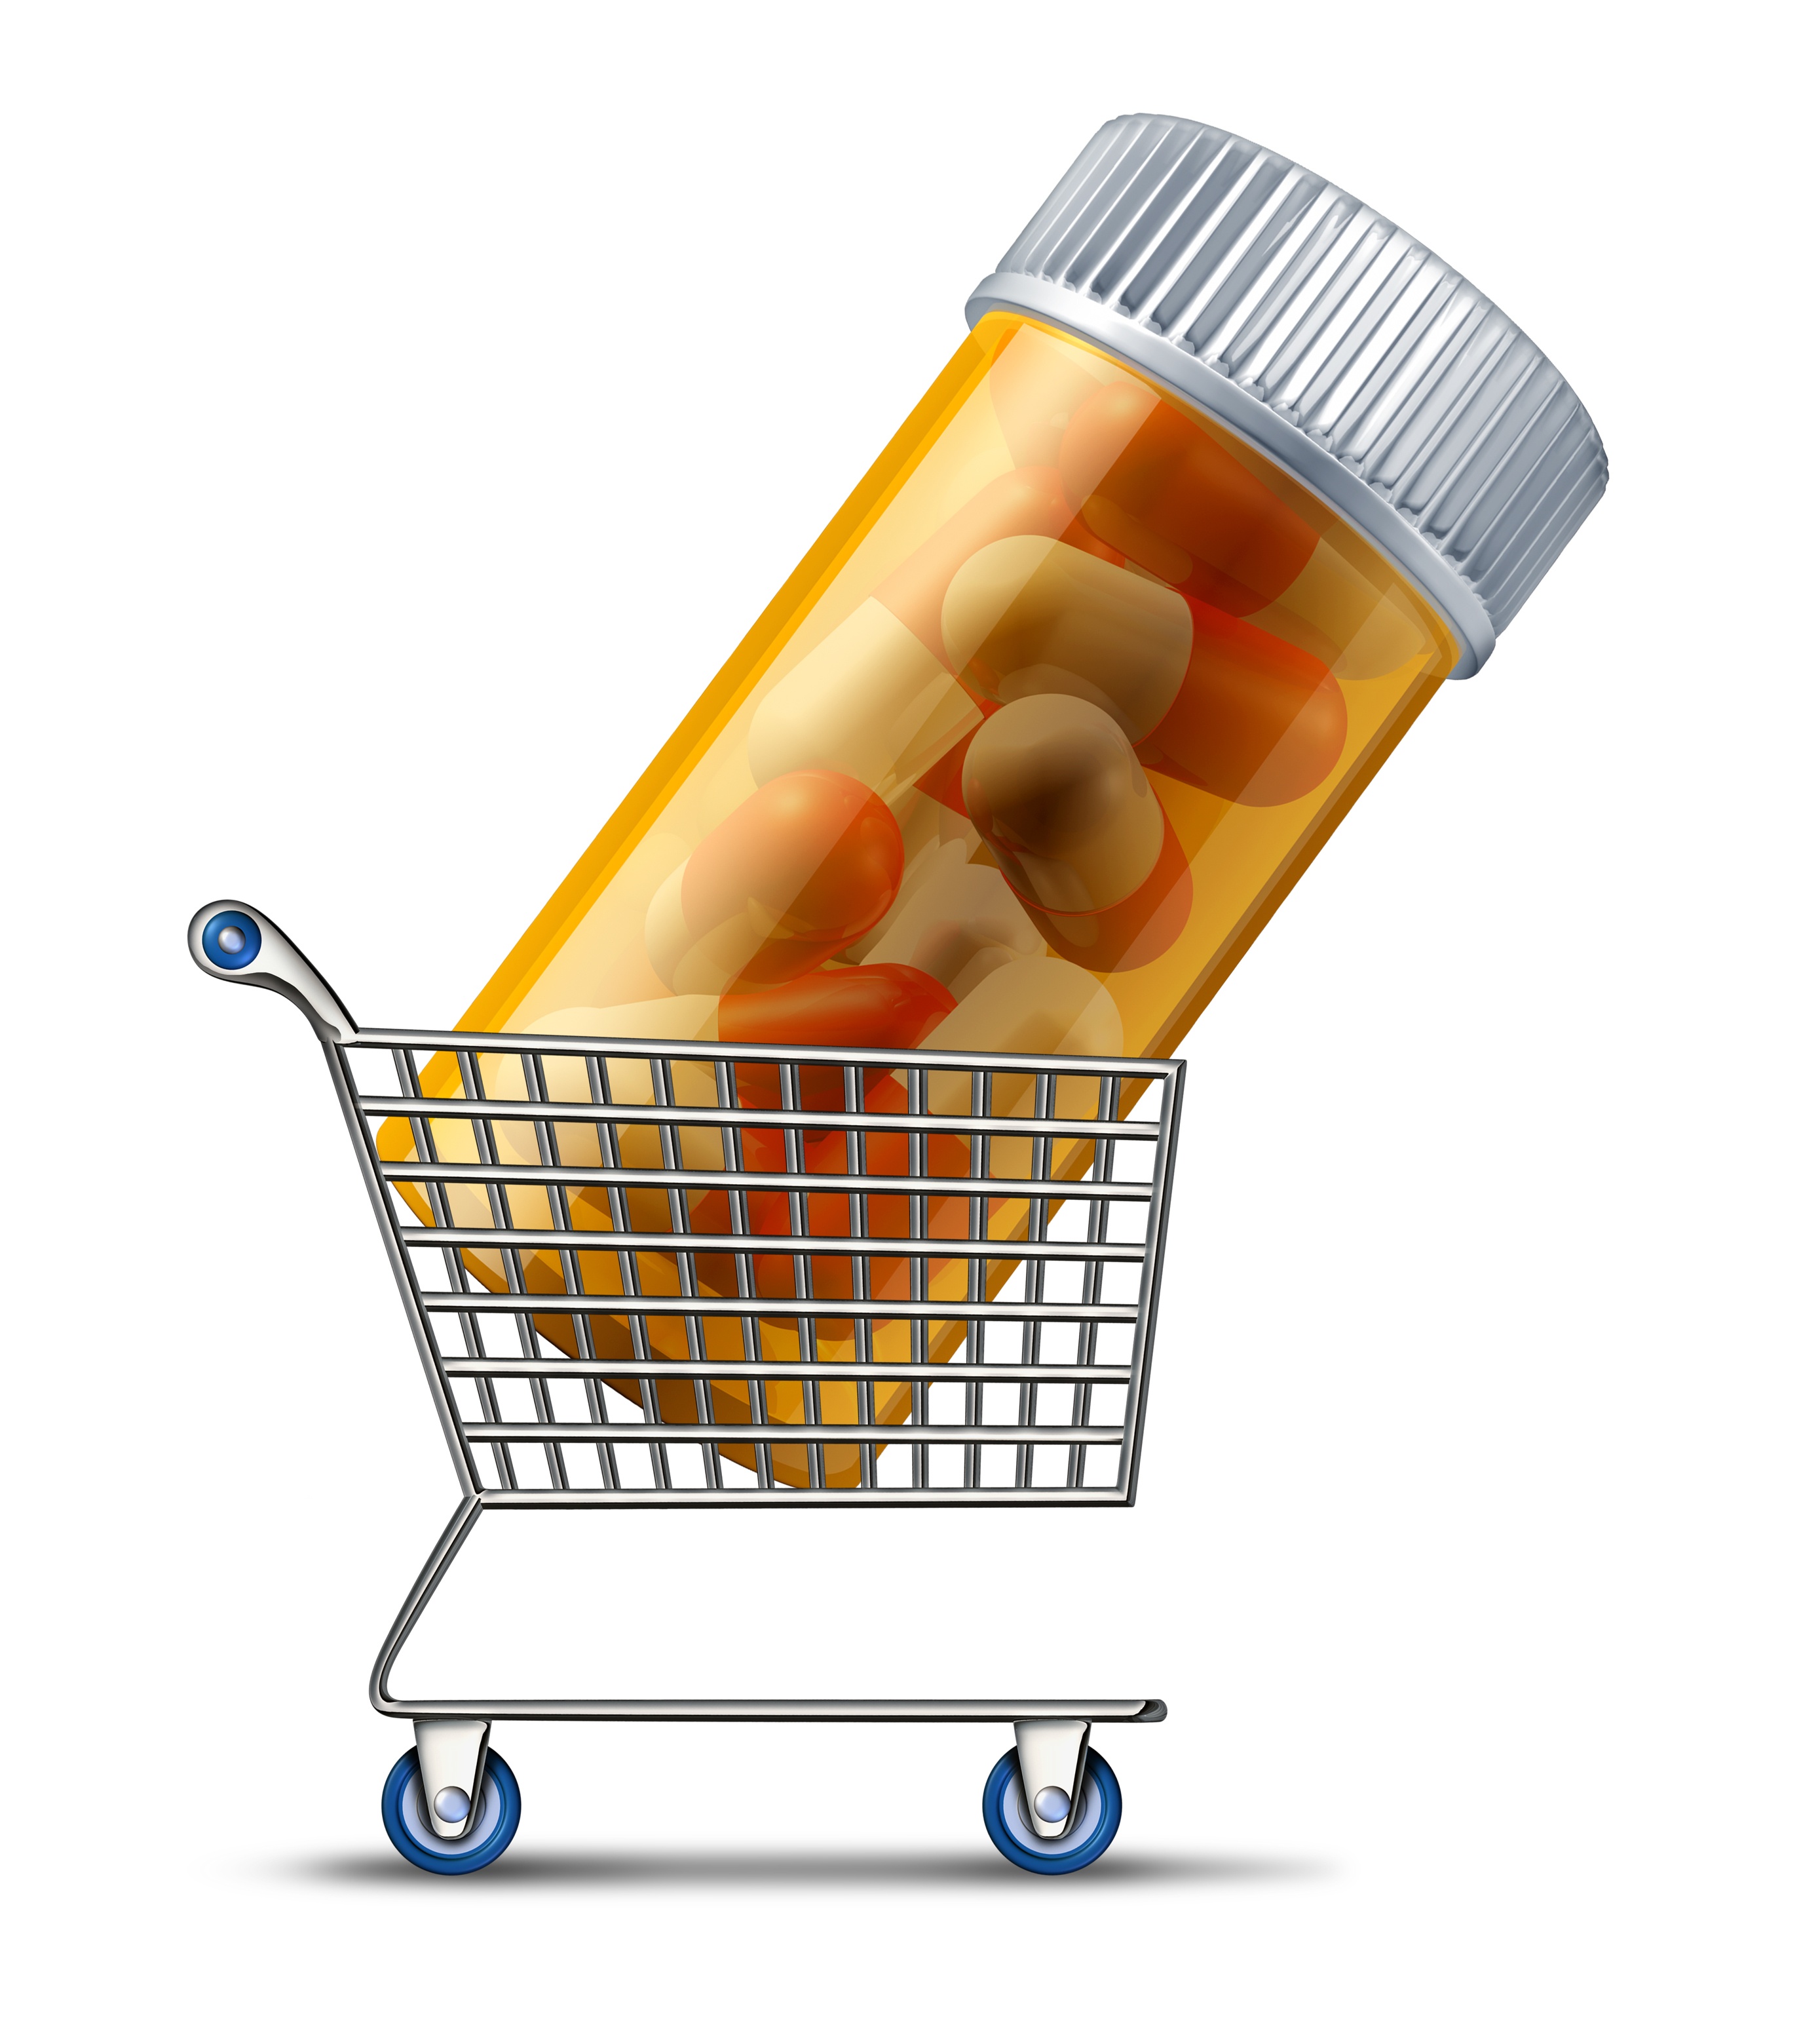 Hurt By a Prescription Drug? Who May Be Held Liable